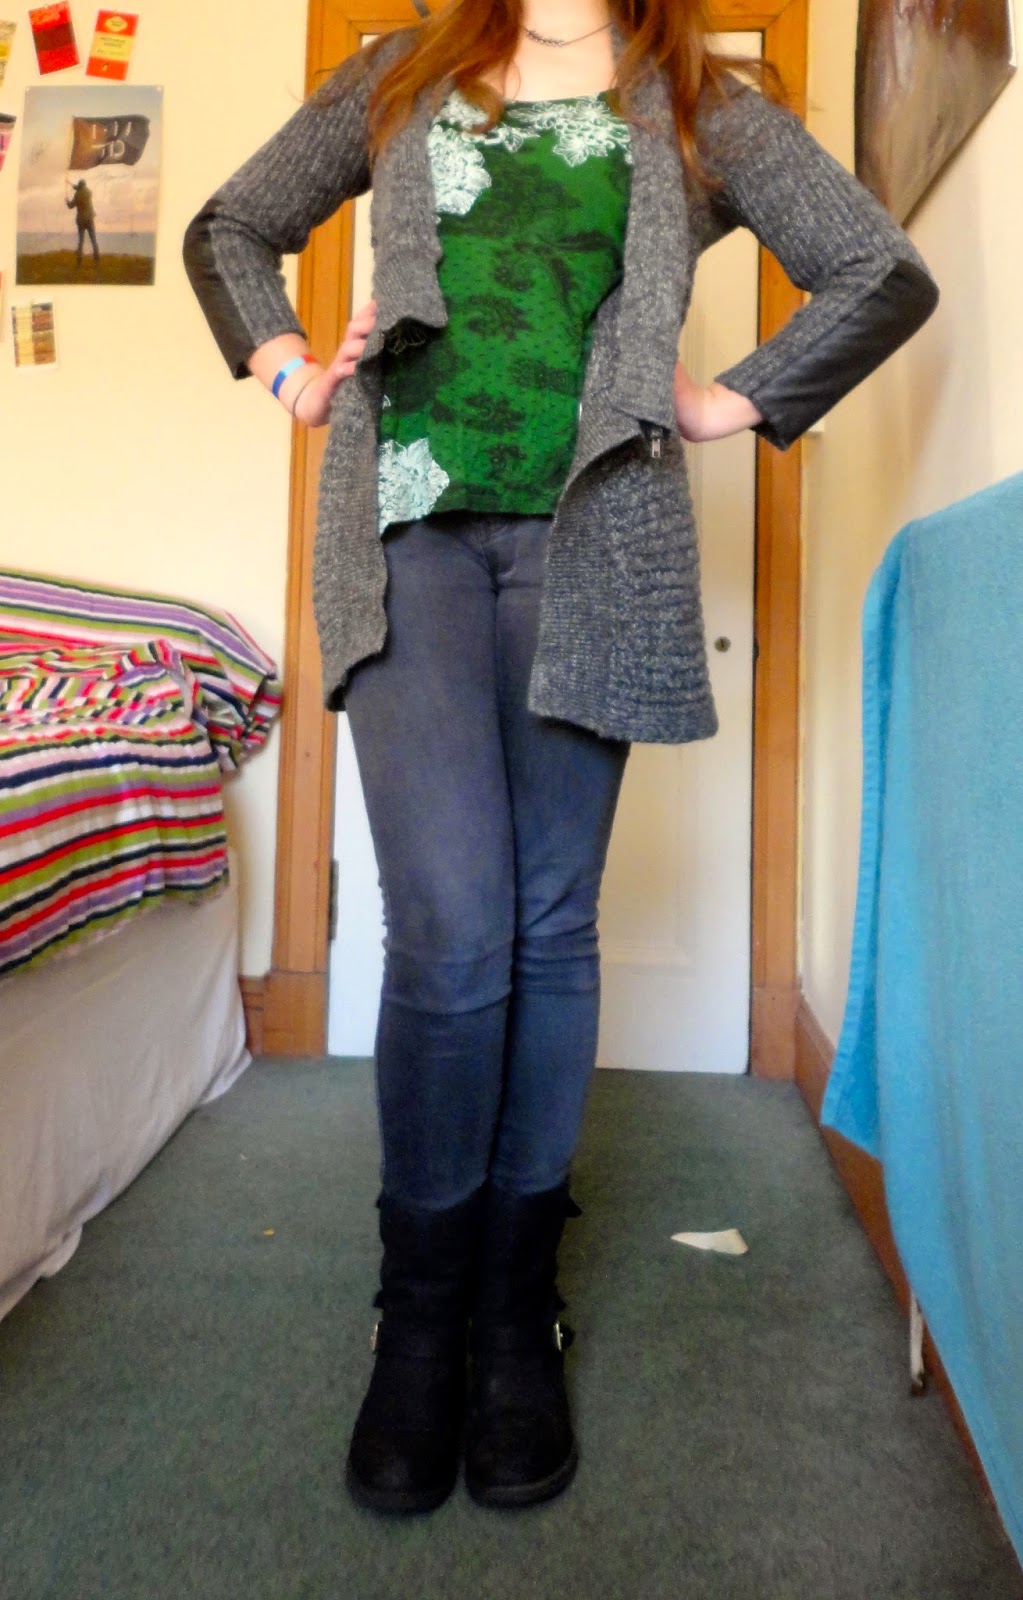 Winter outfit of grey cardigan, green top, jeans and boots